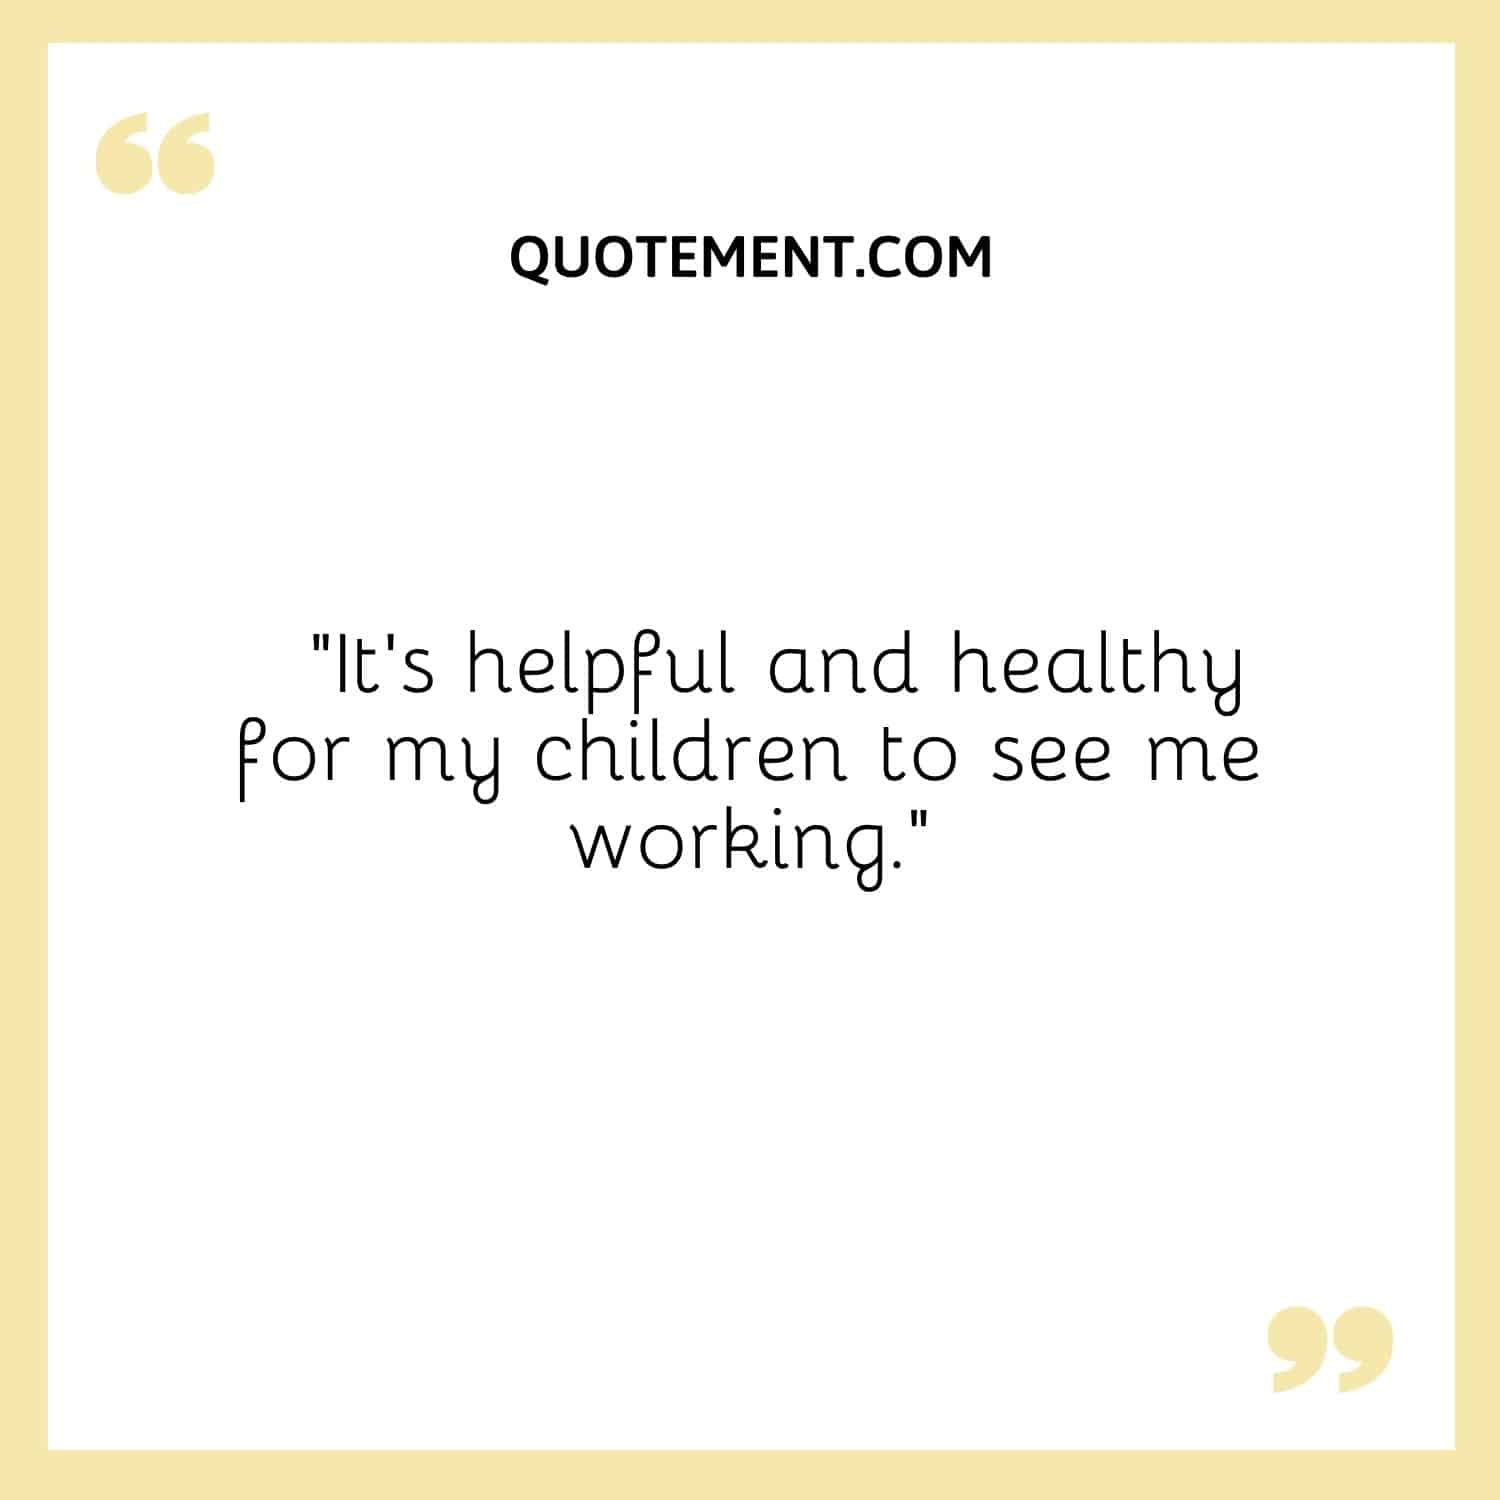 It’s helpful and healthy for my children to see me working